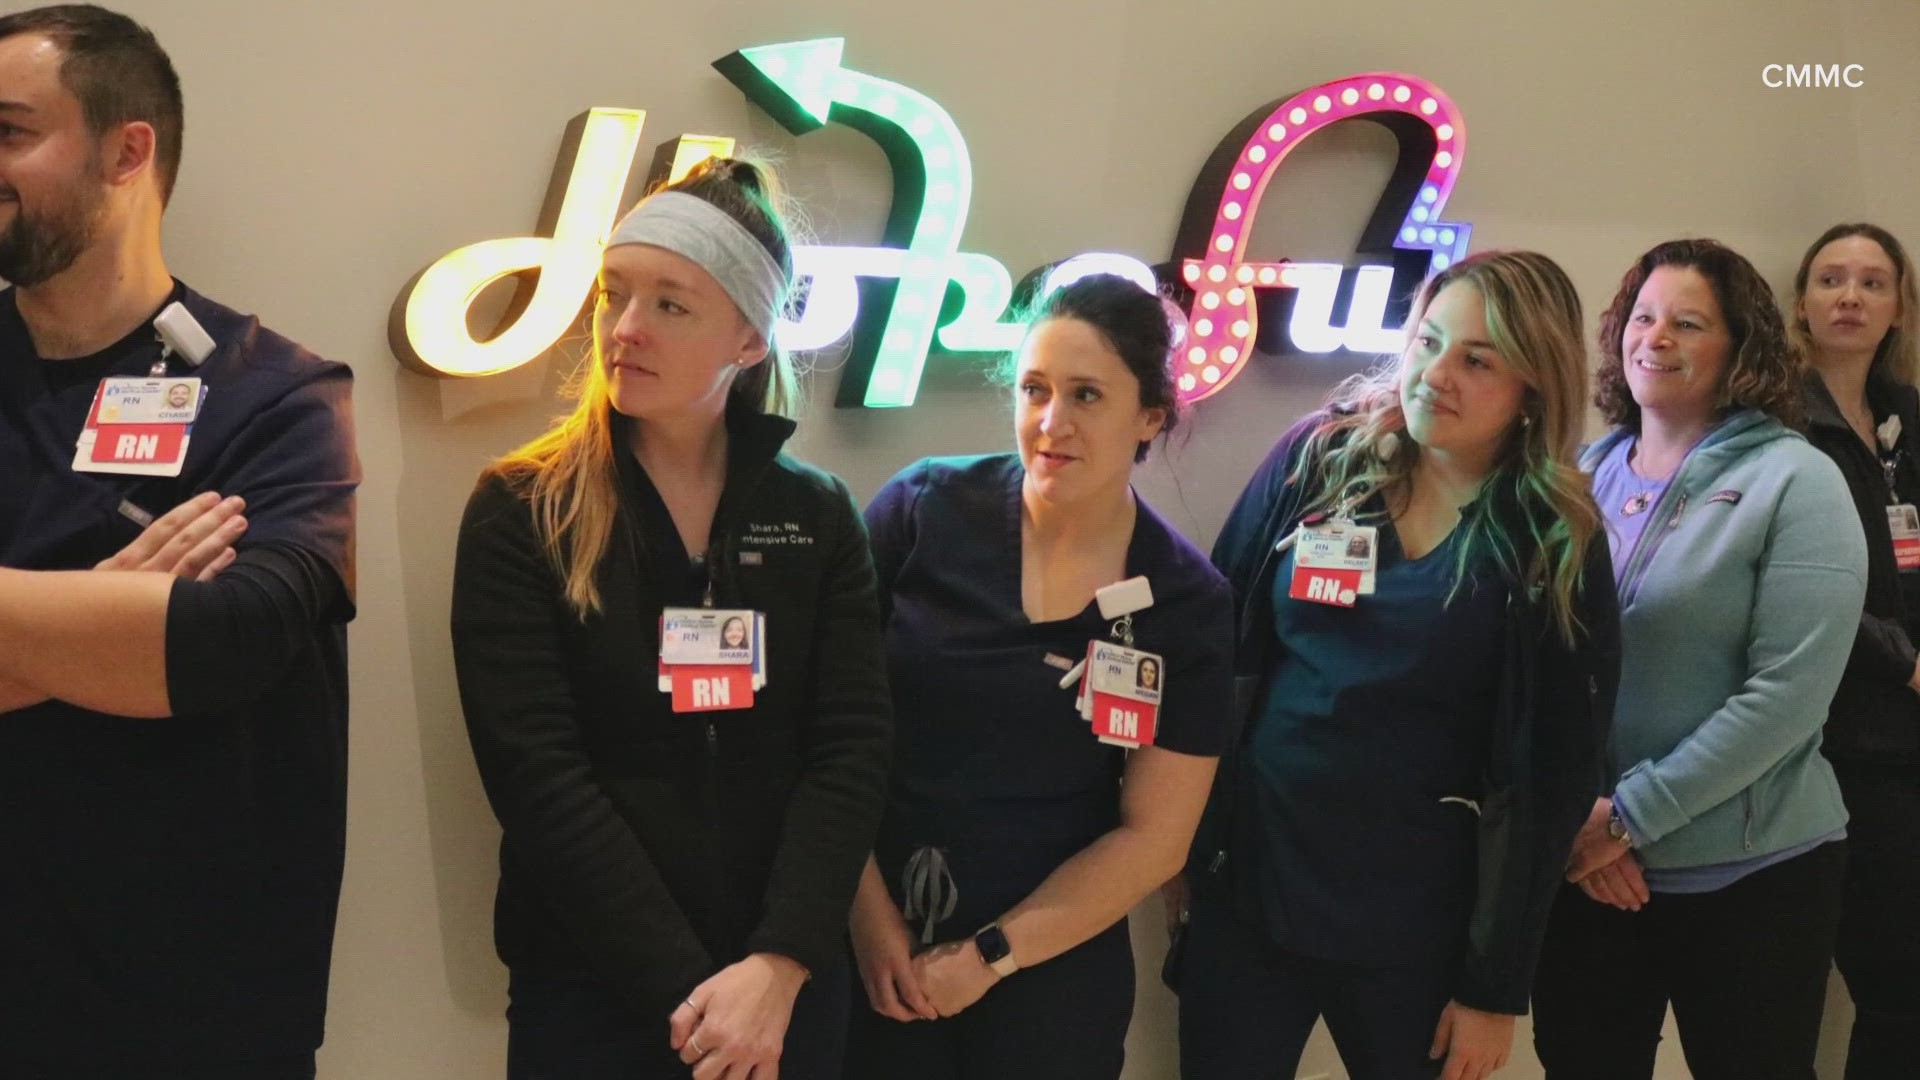 "As the patient was wheeled down the hall, team members put their hands on their hearts in a gesture of solidarity and empathy," Central Maine Healthcare said.